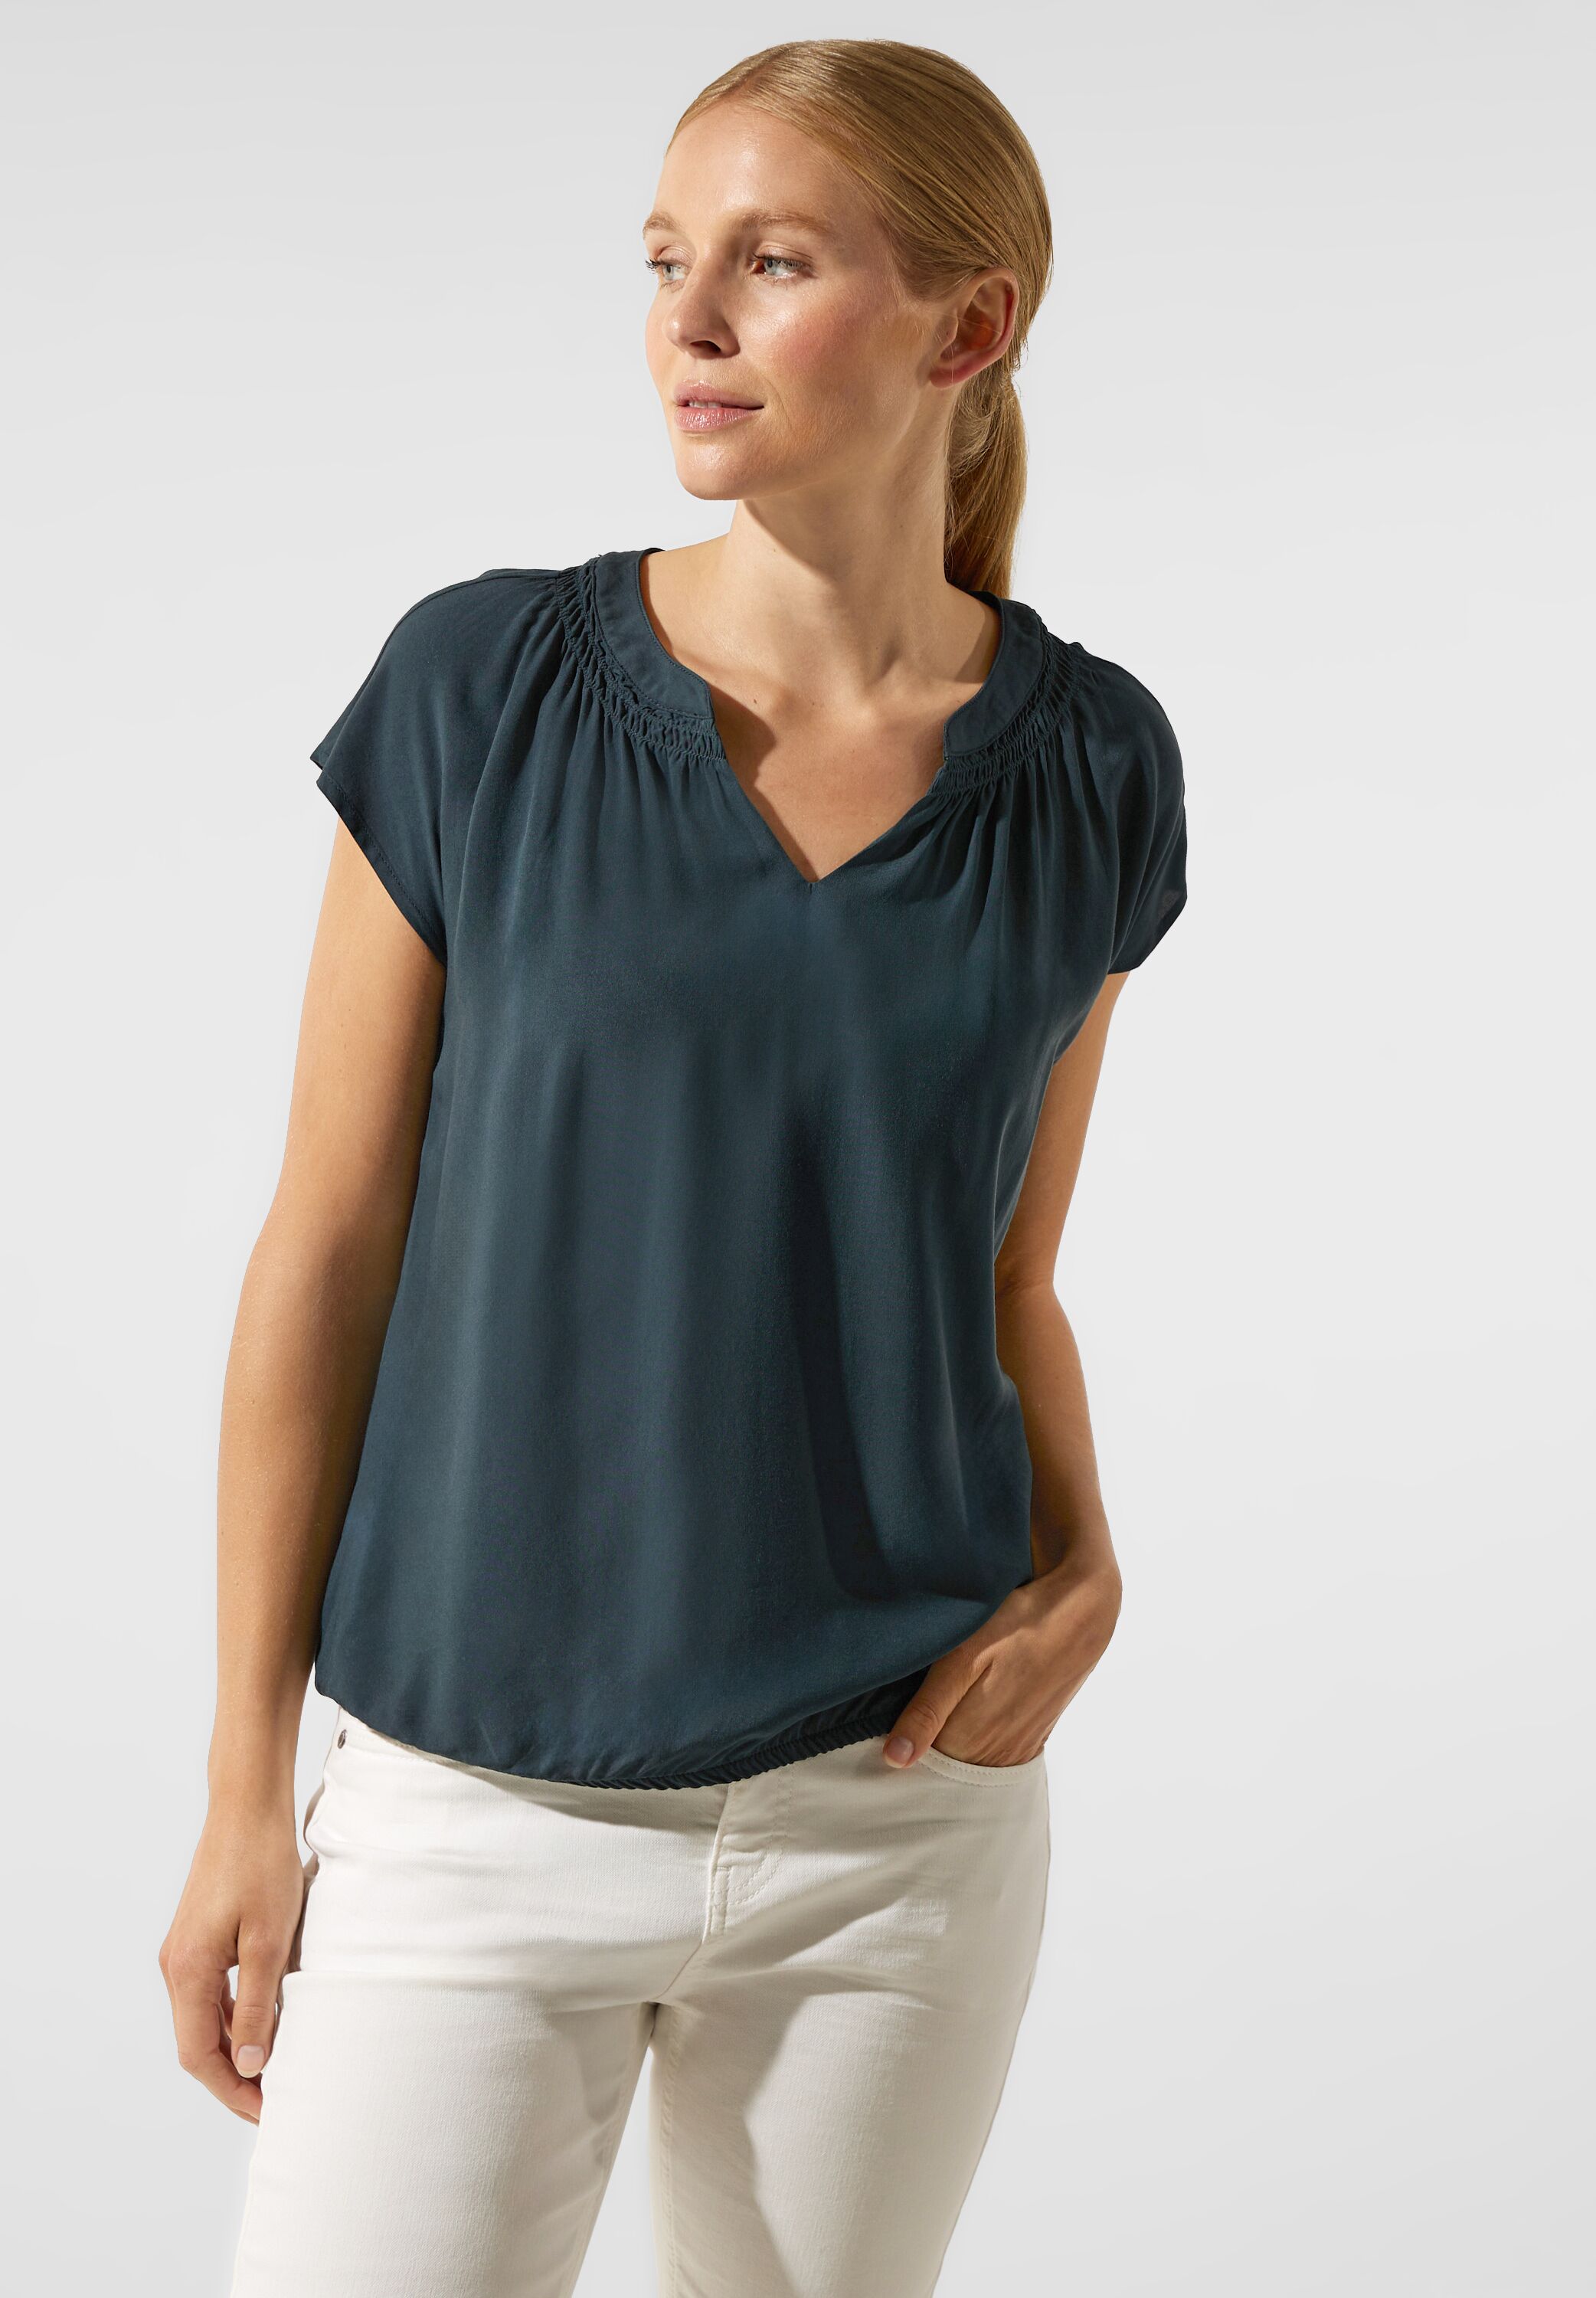 Street One Shirtbluse in Cool Vintage Green im SALE reduziert A344065-13825  - CONCEPT Mode